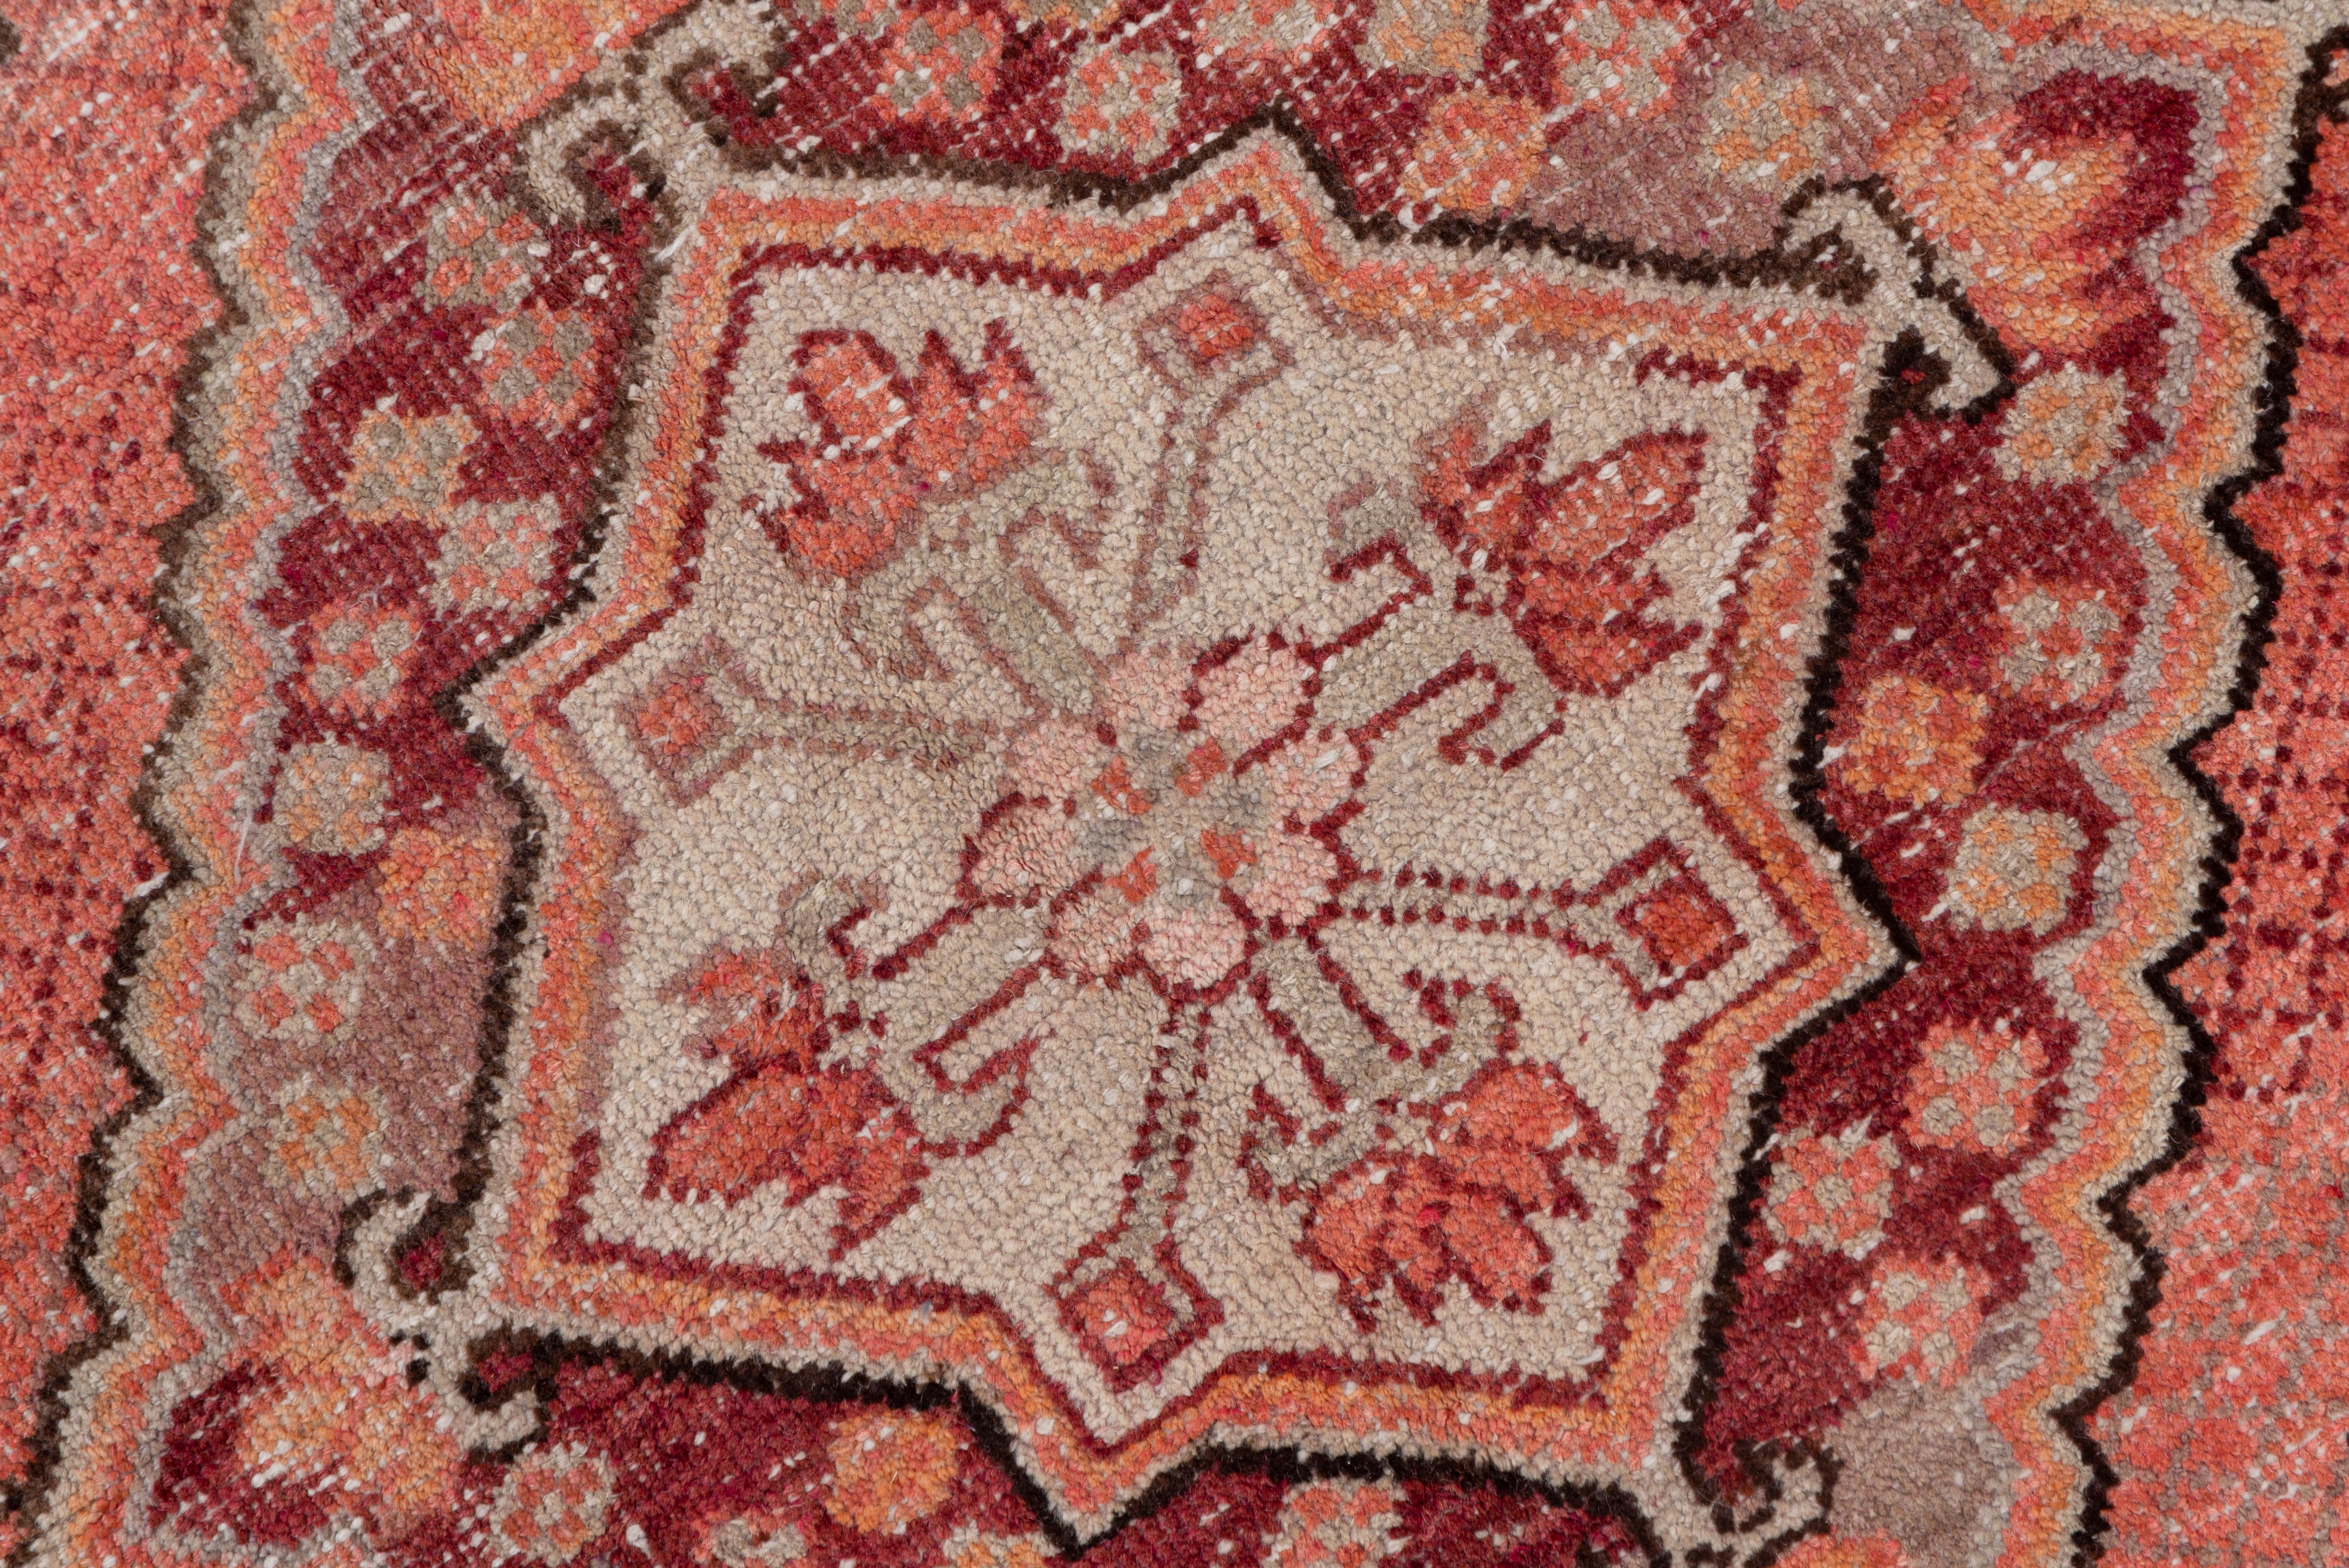 Early 20th Century Antique Tribal Khotan Rug, Pink Red Orange and Light Blue Palette Unusual Design For Sale